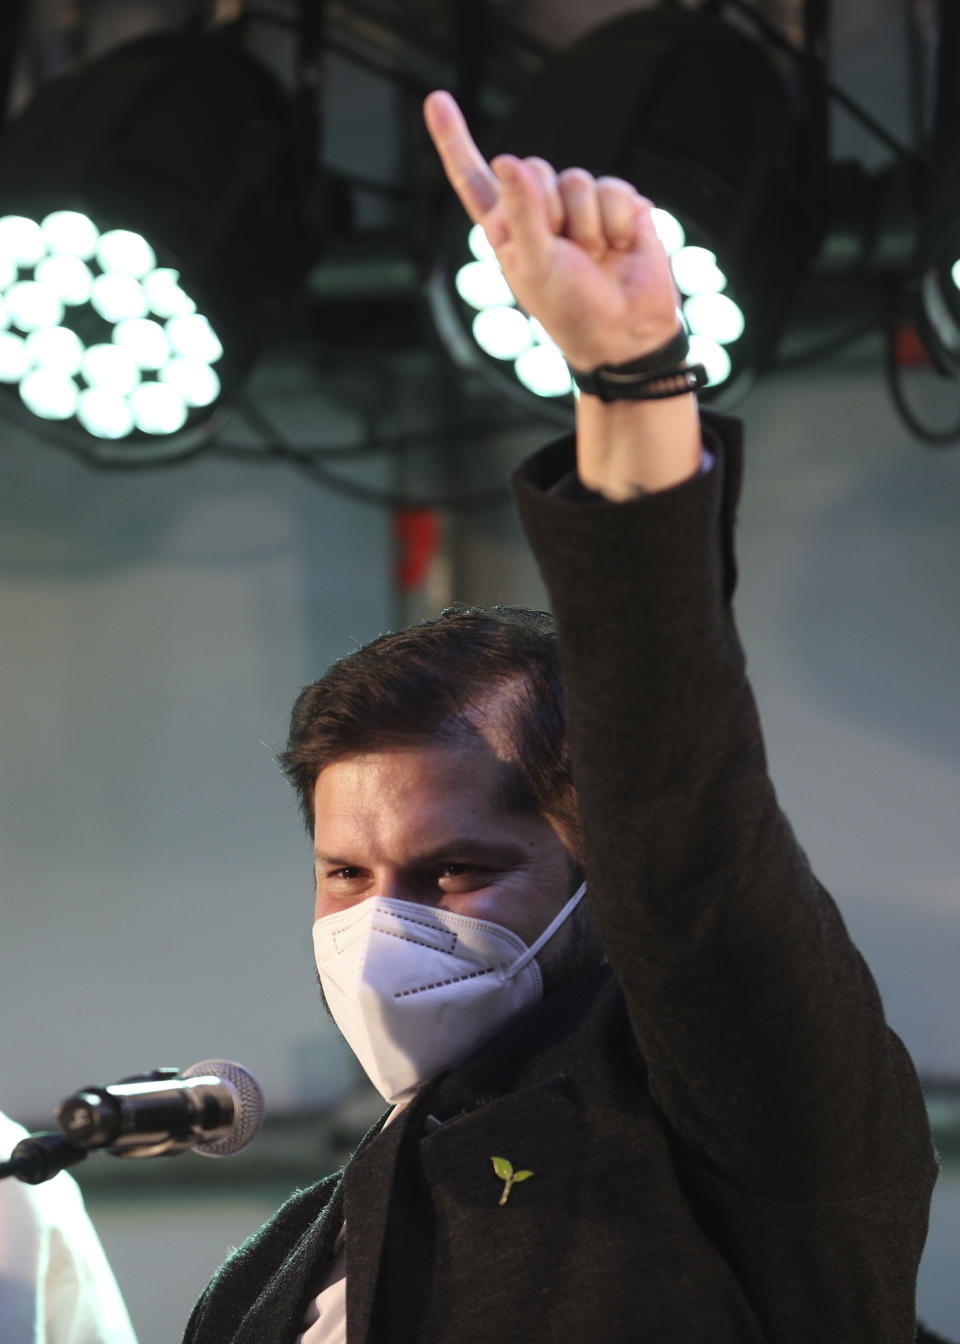 Presidential candidate Gabriel Boric, of the political alliance "Apruebo Dignidad," or I Approve of Dignity, gestures before supporters at his election day headquarters after polls closed and partial results were announced in Santiago, Chile, Sunday, Nov. 21, 2021. (AP Photo/Aliosha Marquez)